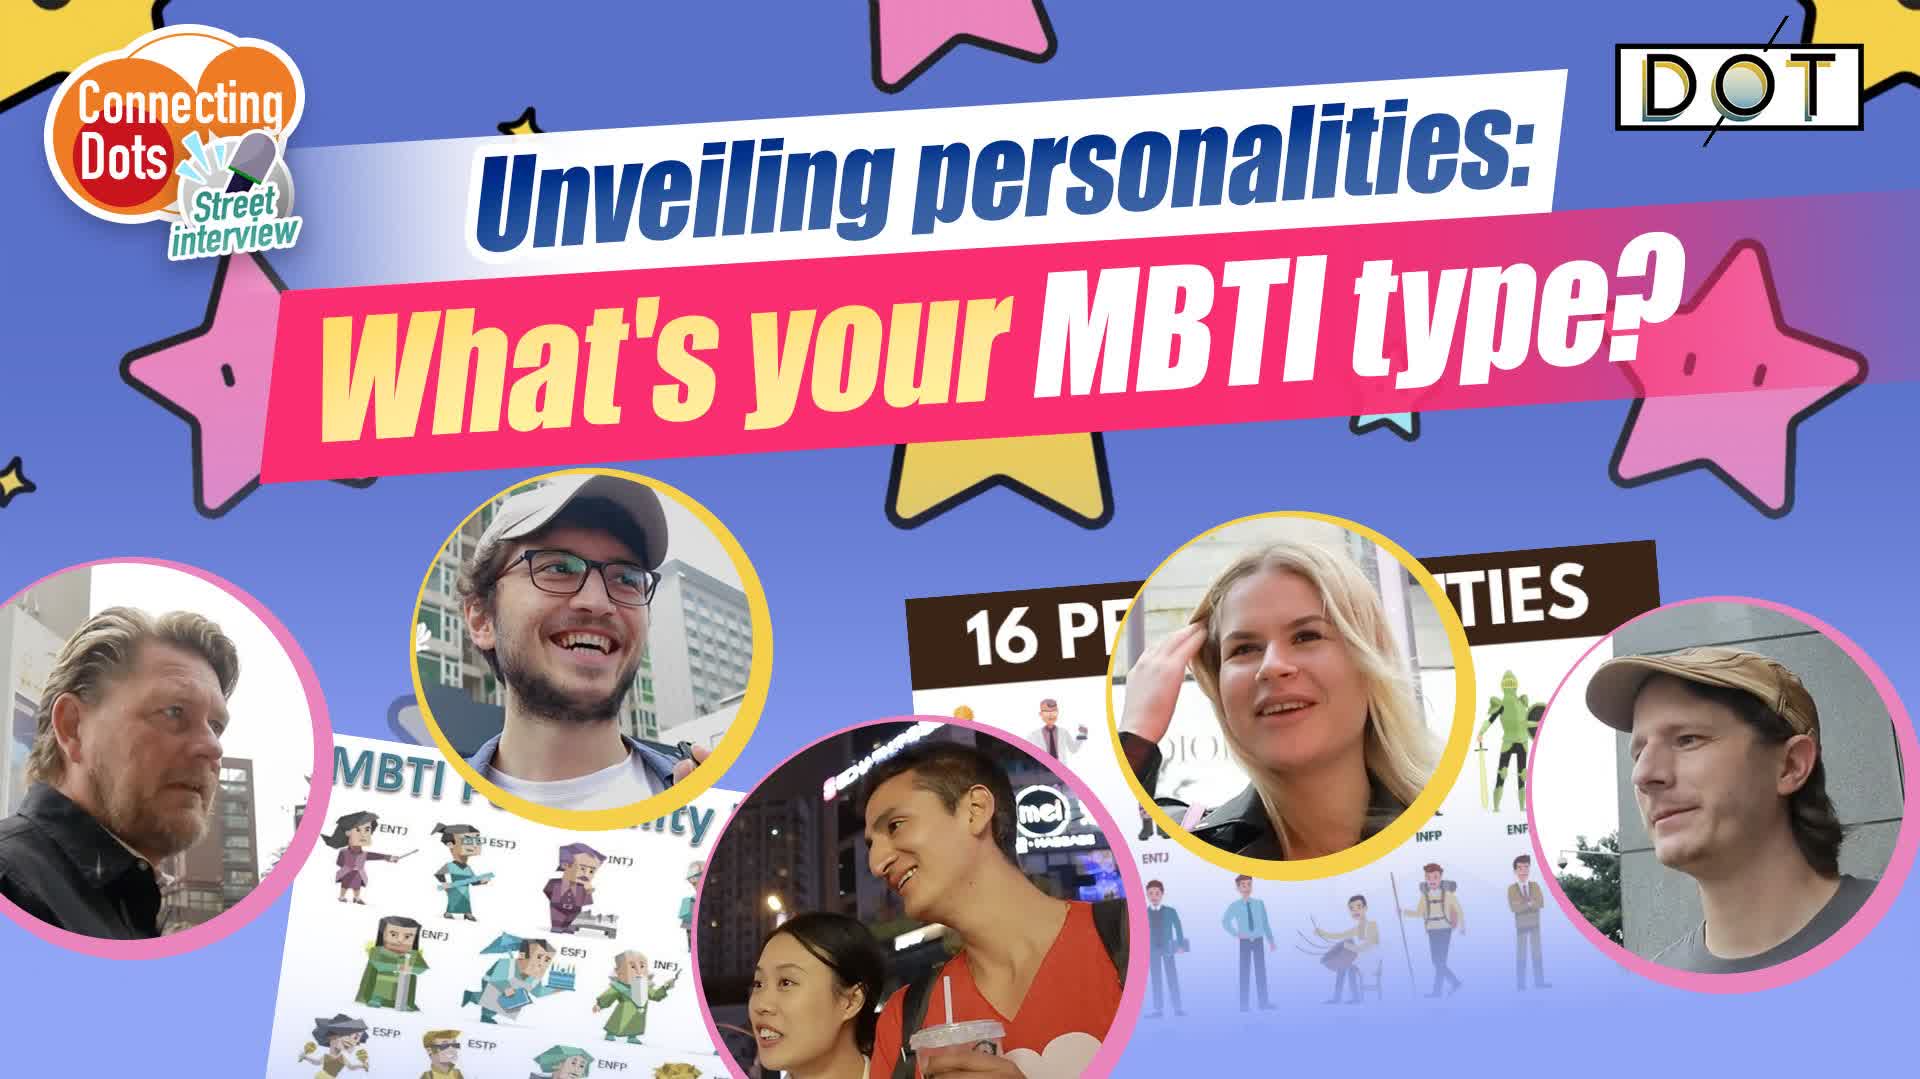 Connecting Dots | Unveiling personalities: What's your MBTI type?